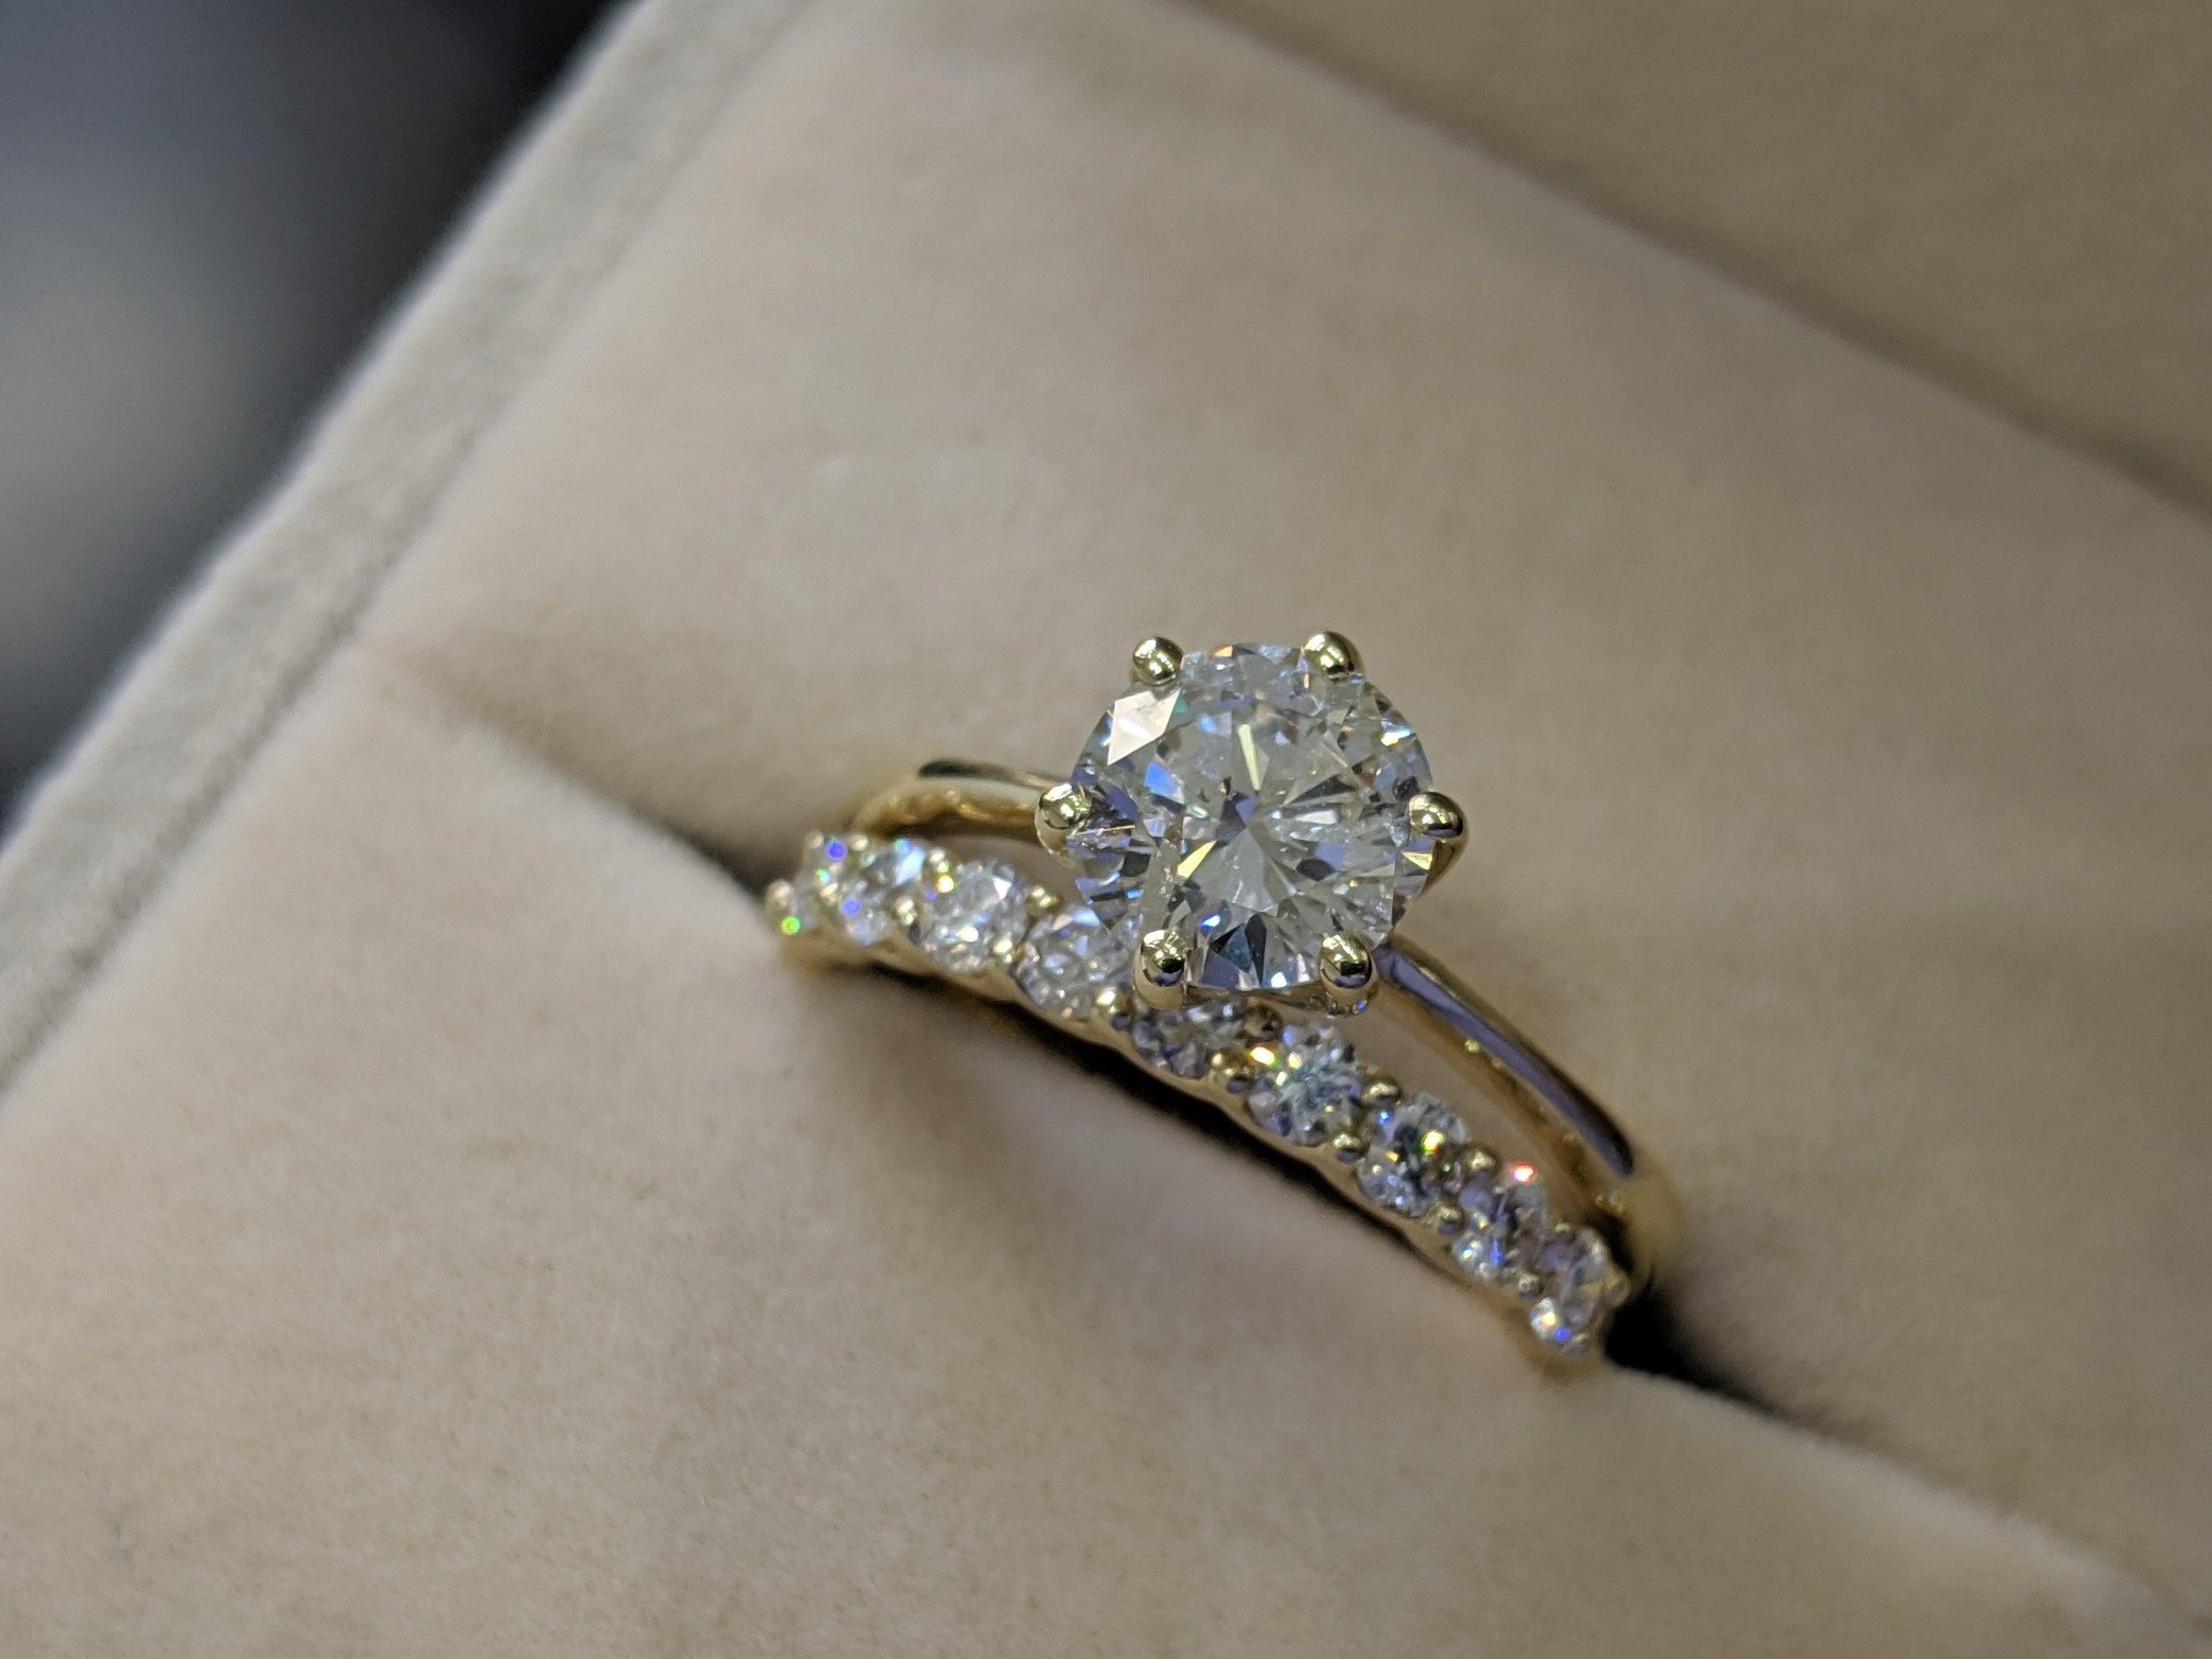 2 carat yellow gold solitaire engagement rings